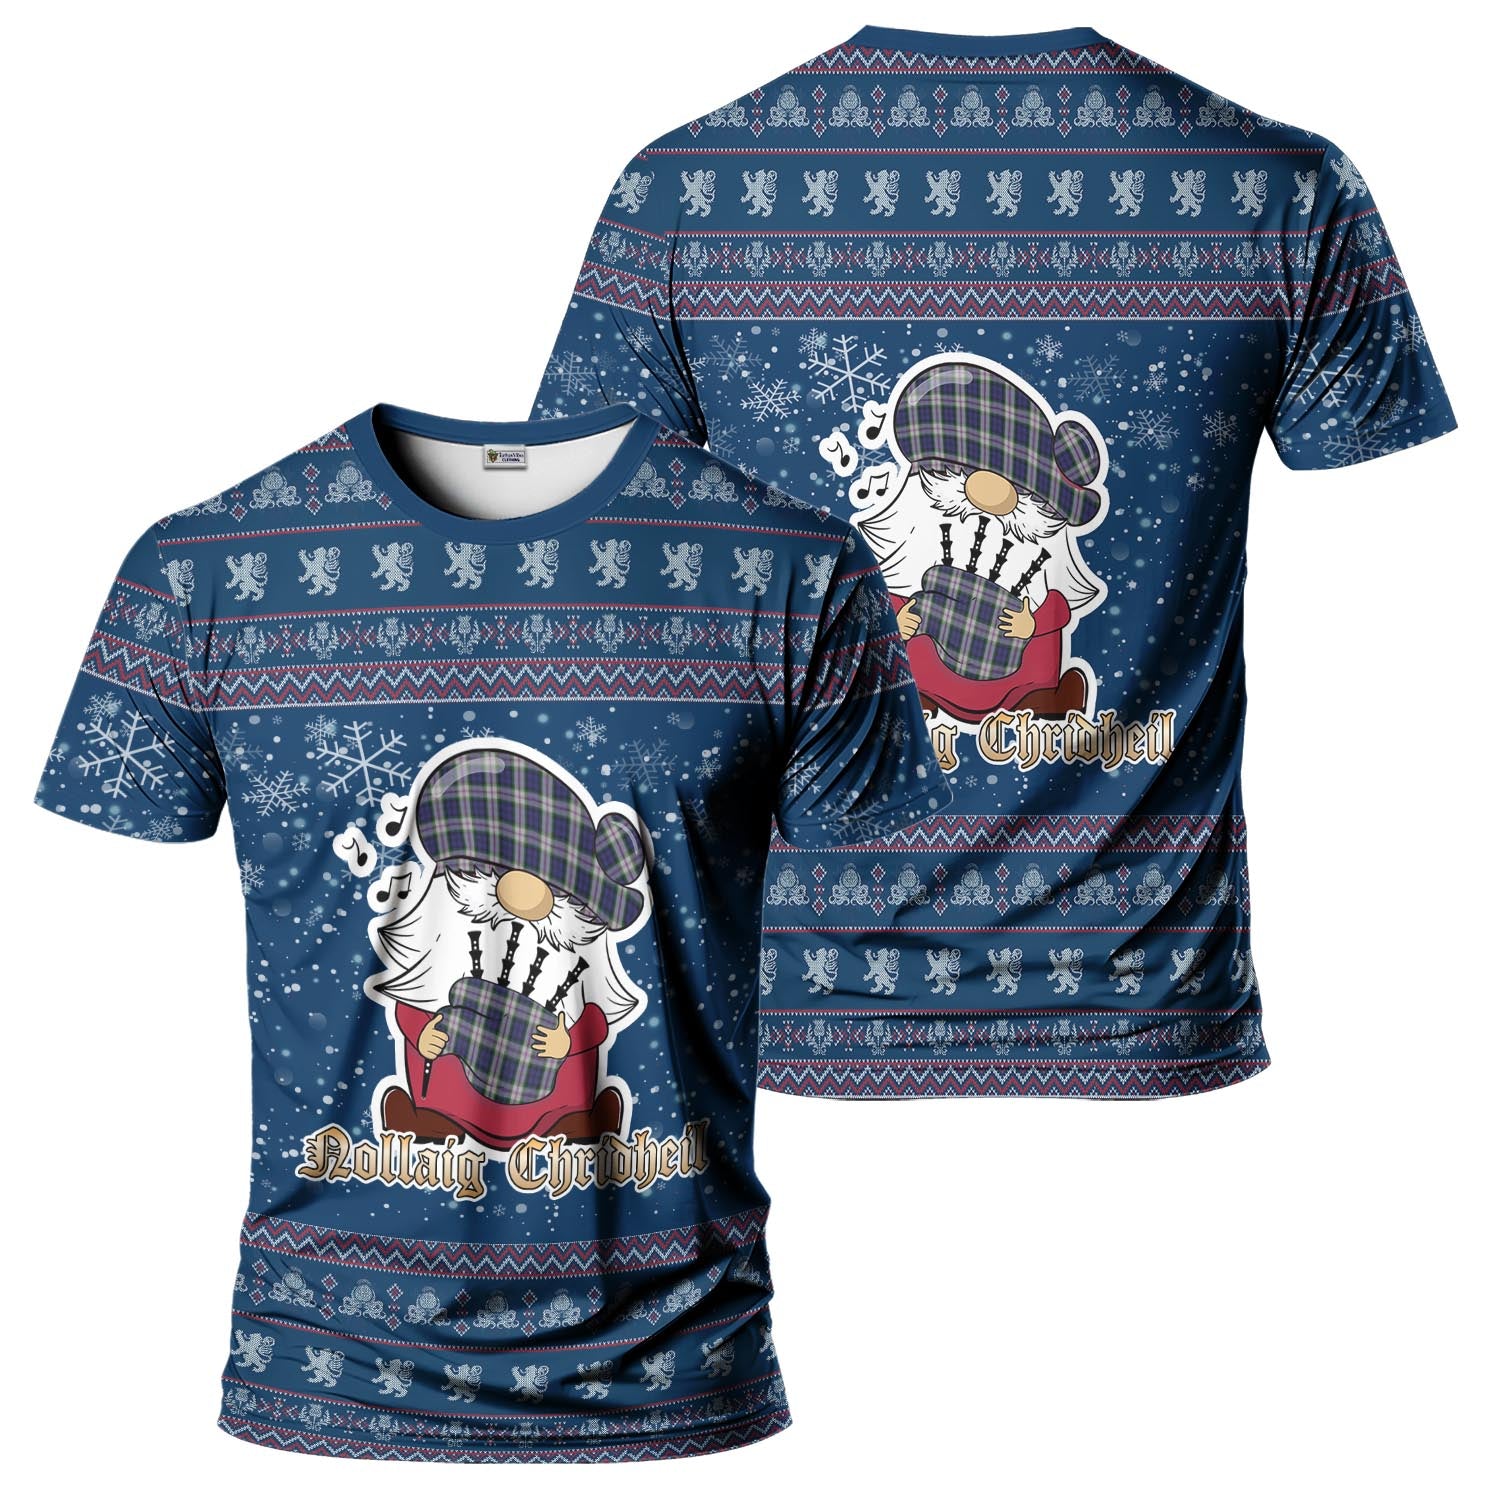 Baird Dress Clan Christmas Family T-Shirt with Funny Gnome Playing Bagpipes Kid's Shirt Blue - Tartanvibesclothing